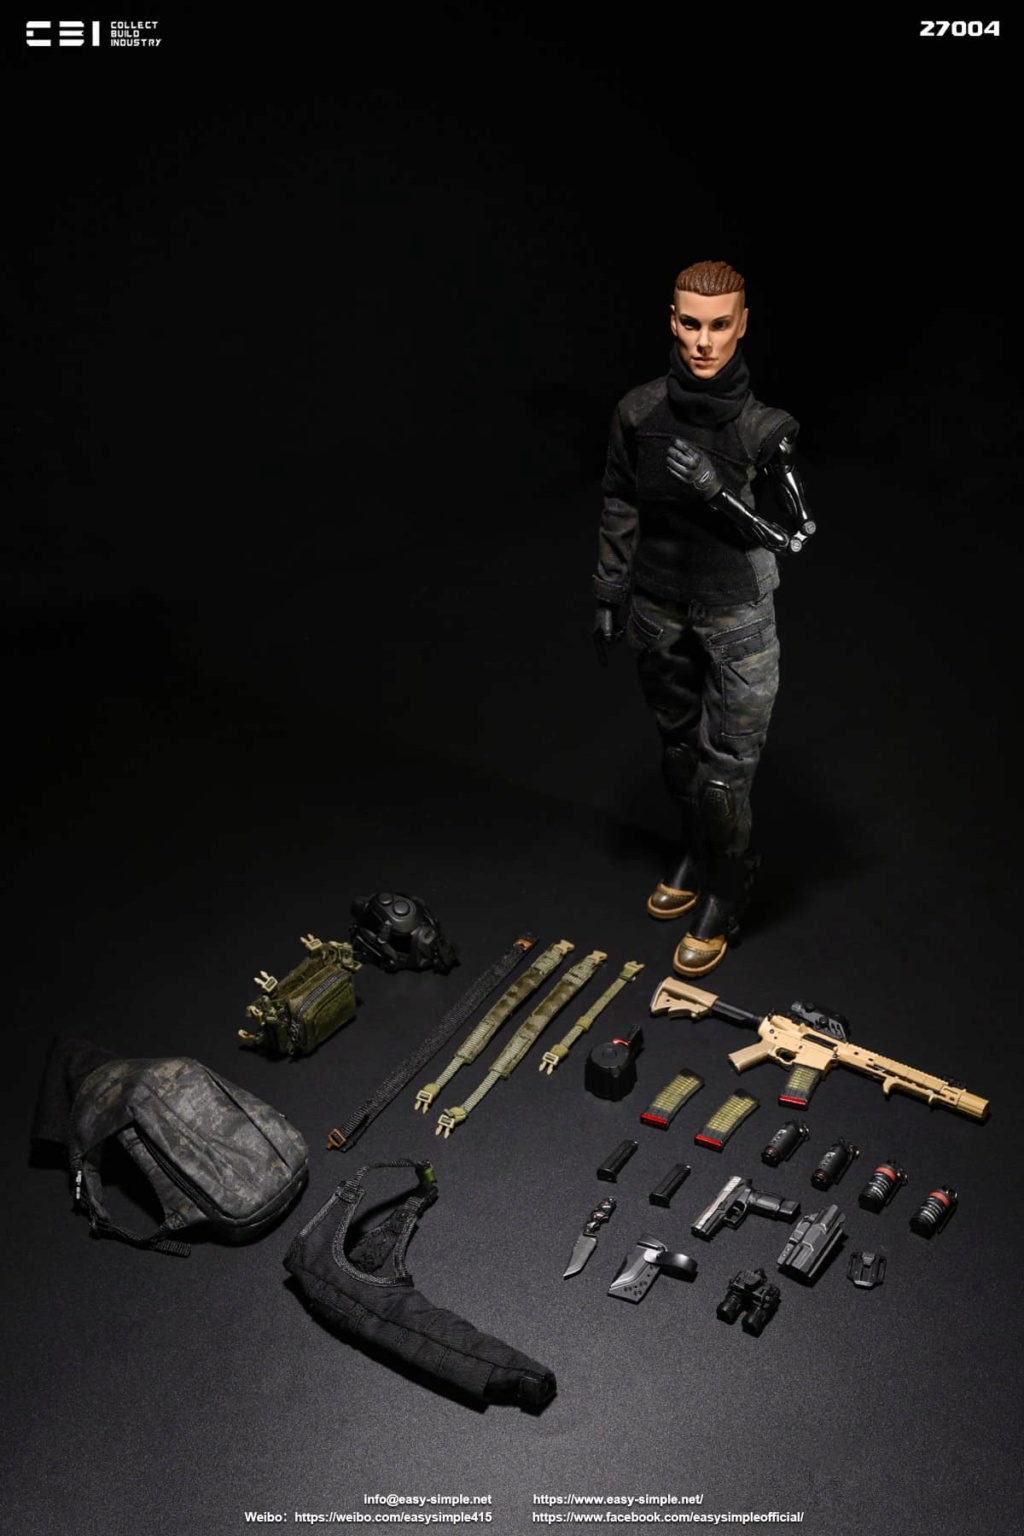 female - NEW PRODUCT: CBI & Easy&Simple: 27004 1/6 ERICA STORM - TASK FORCE 58 CPO action figure 5649